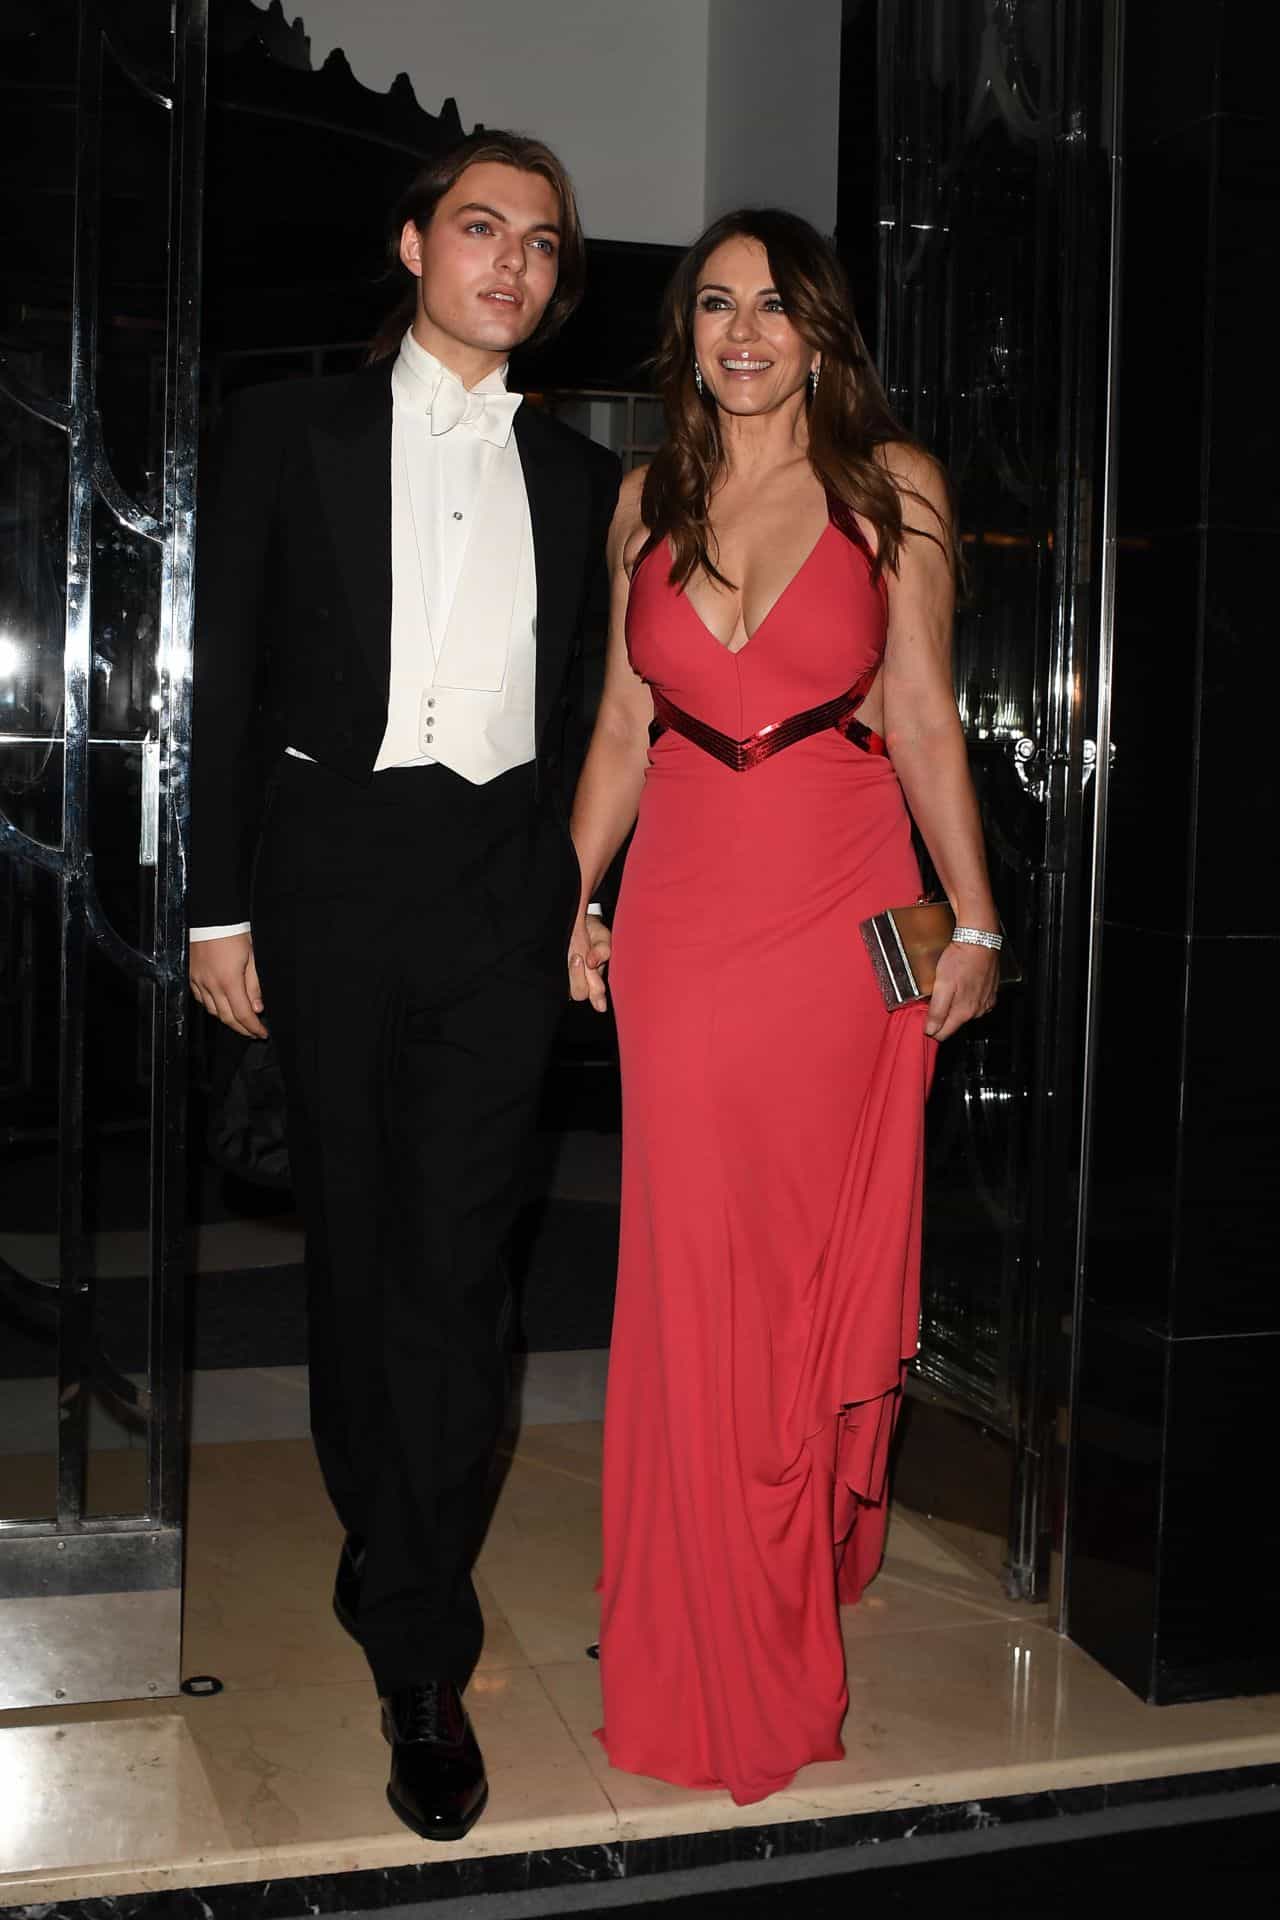 Elizabeth Hurley Stuns in a Red Dress at Joan Collins' 88th Birthday Party